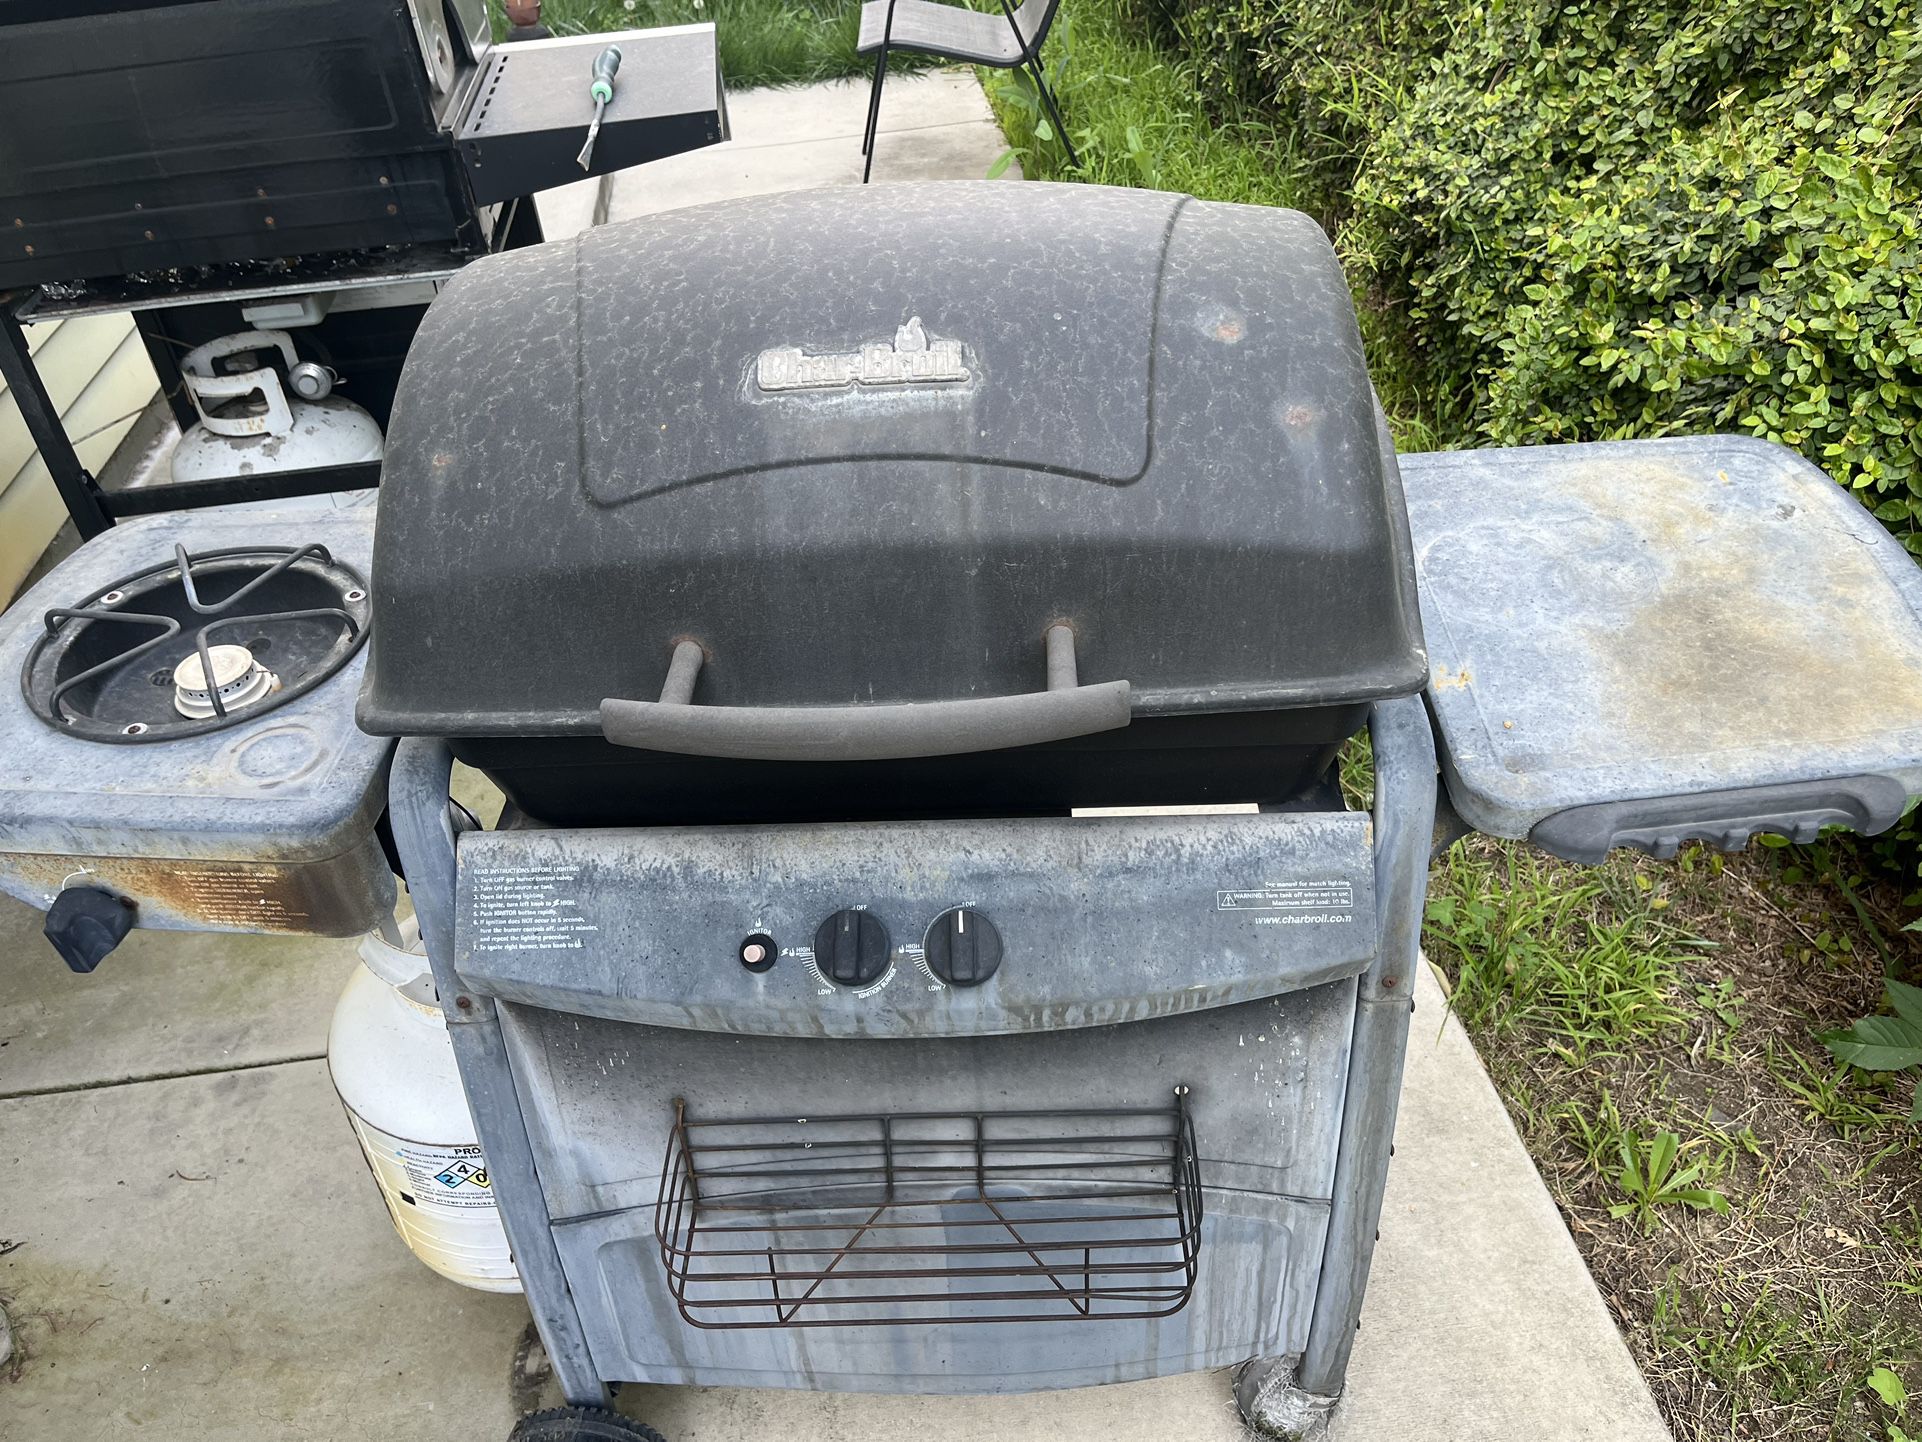 Bbq Grill With Tank